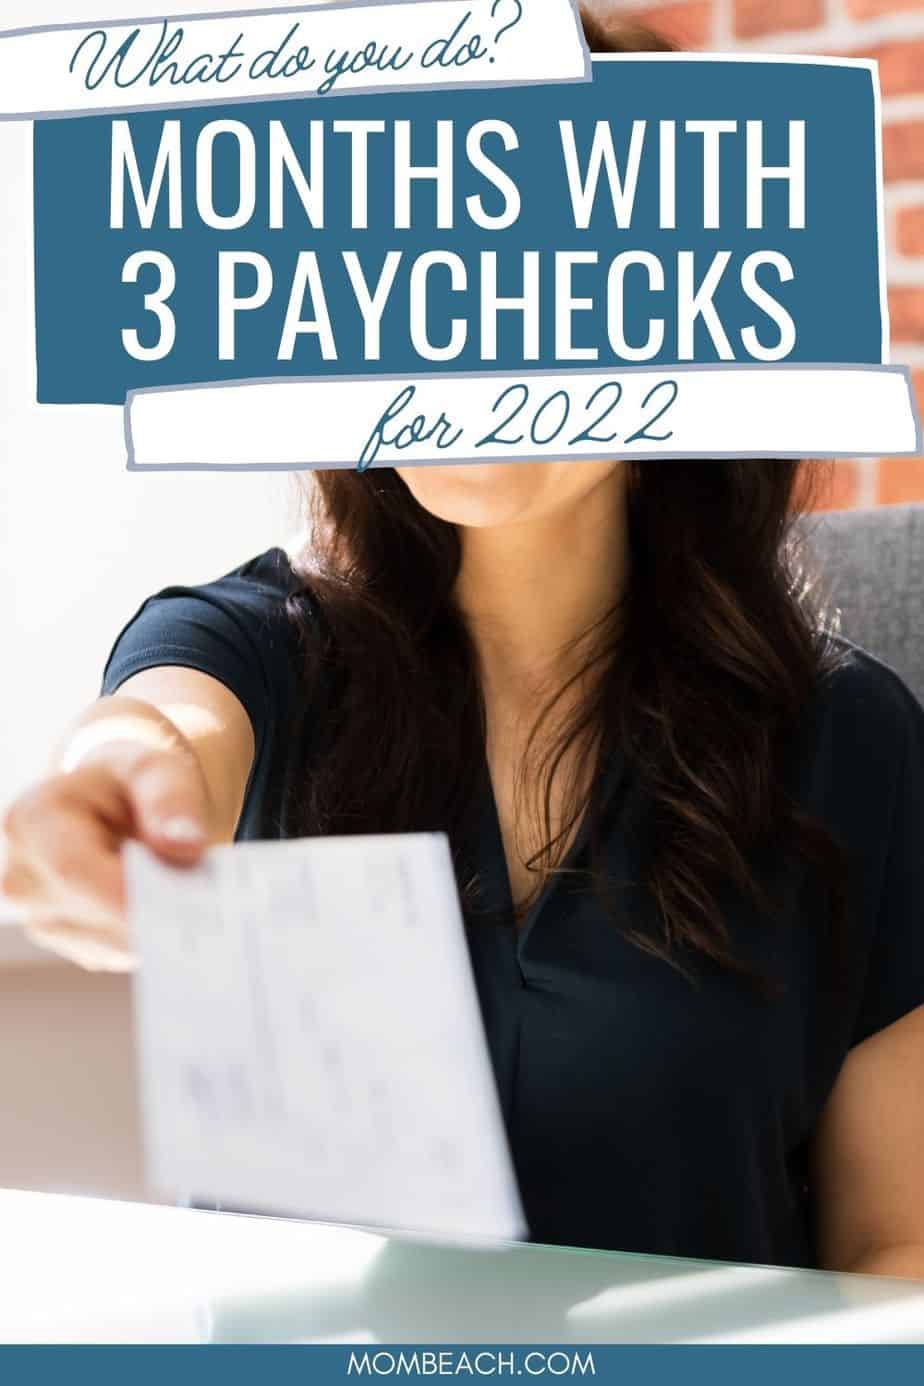 Months with 3 Paychecks for 2023 and What to Do Freebie!